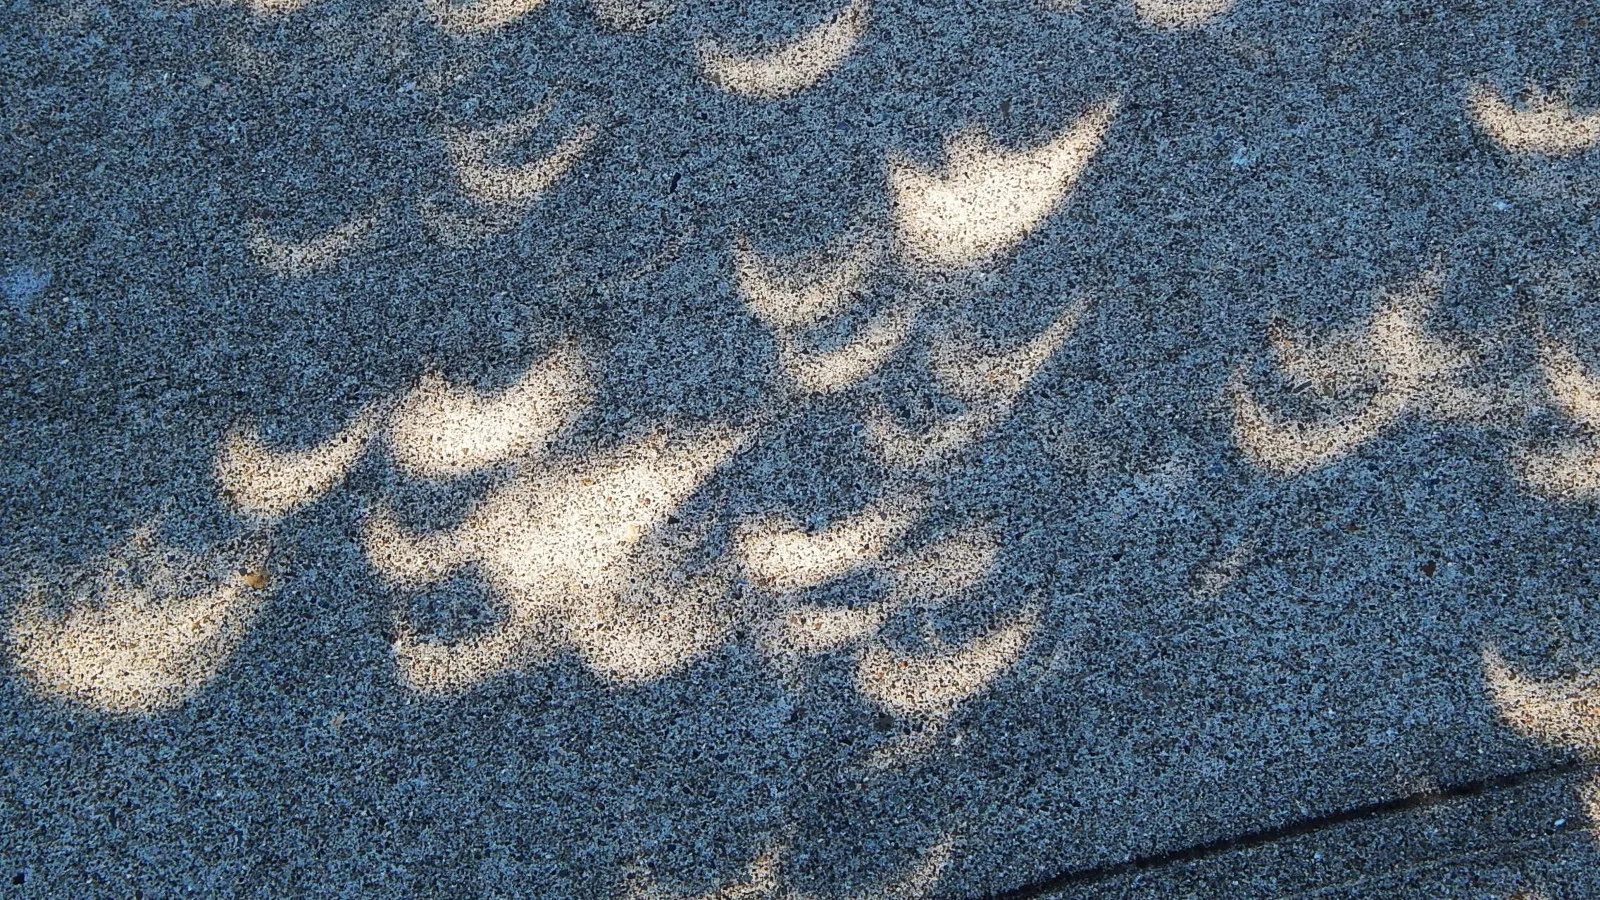 Crescent suns projected through holes in tree leaves onto sidewalk - Ron Clausen Wikimedia